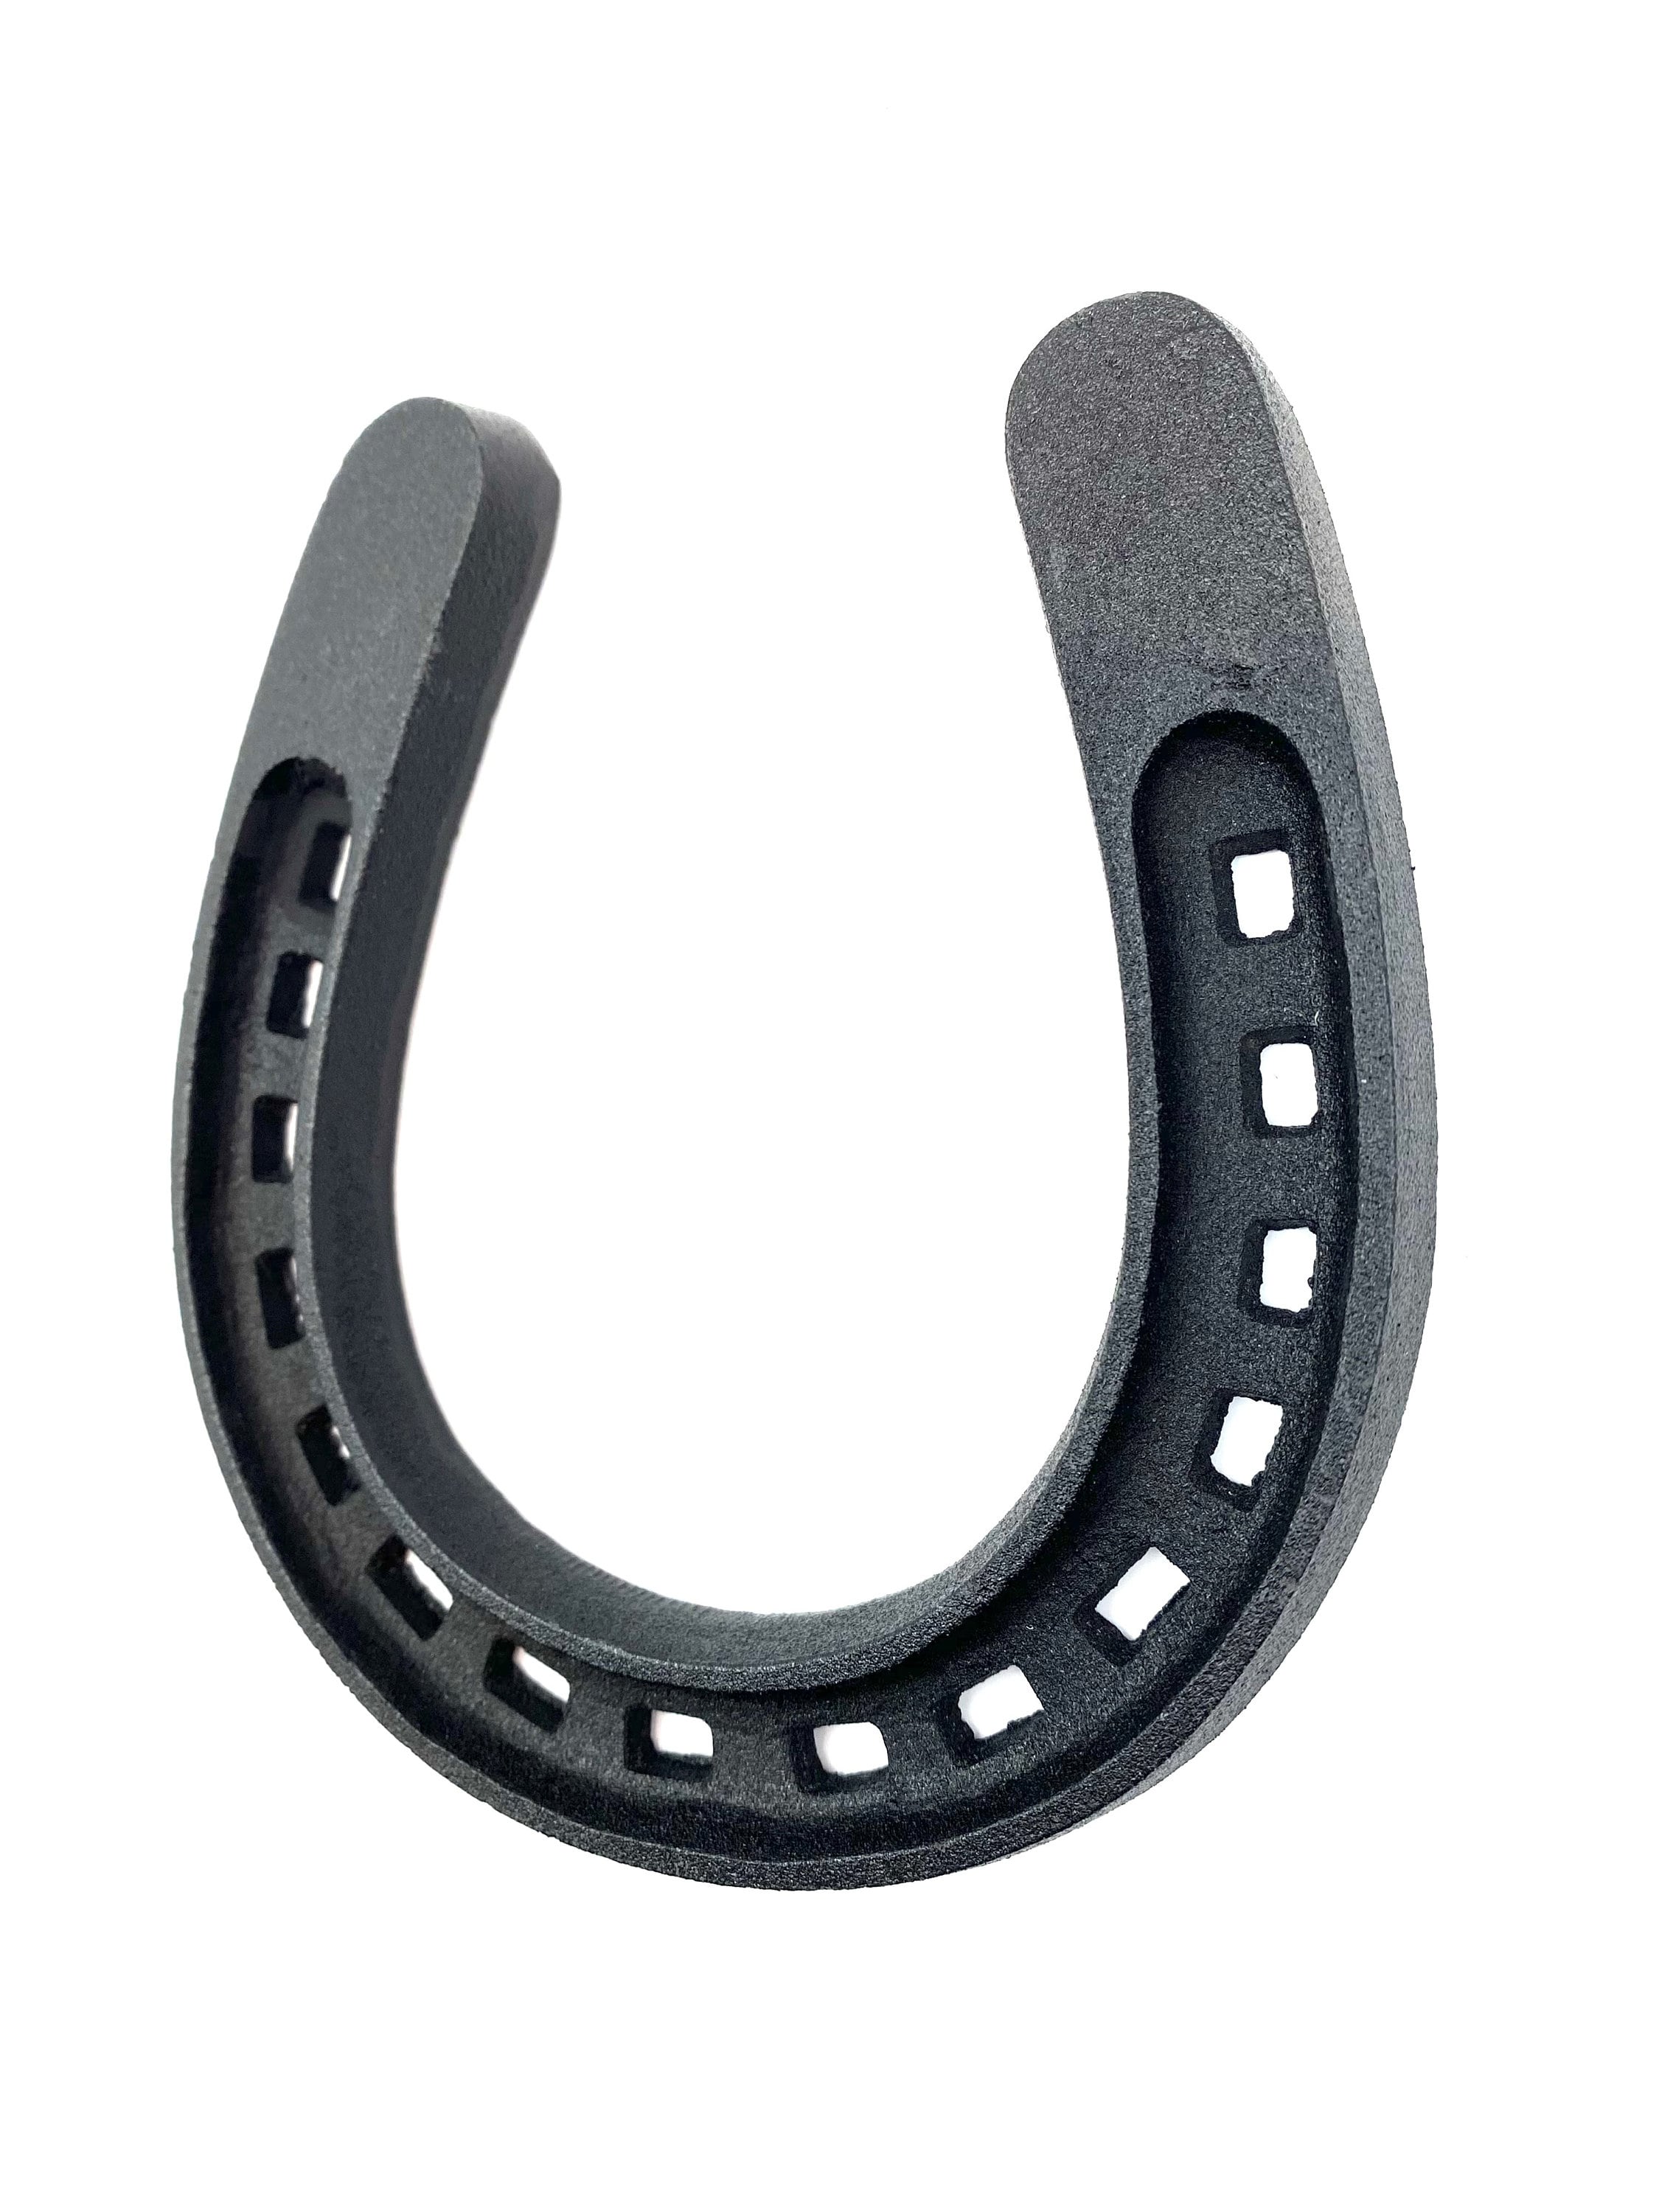 Factgory Price Wholesale Low Carbon Steel Horse Shoes for Horses